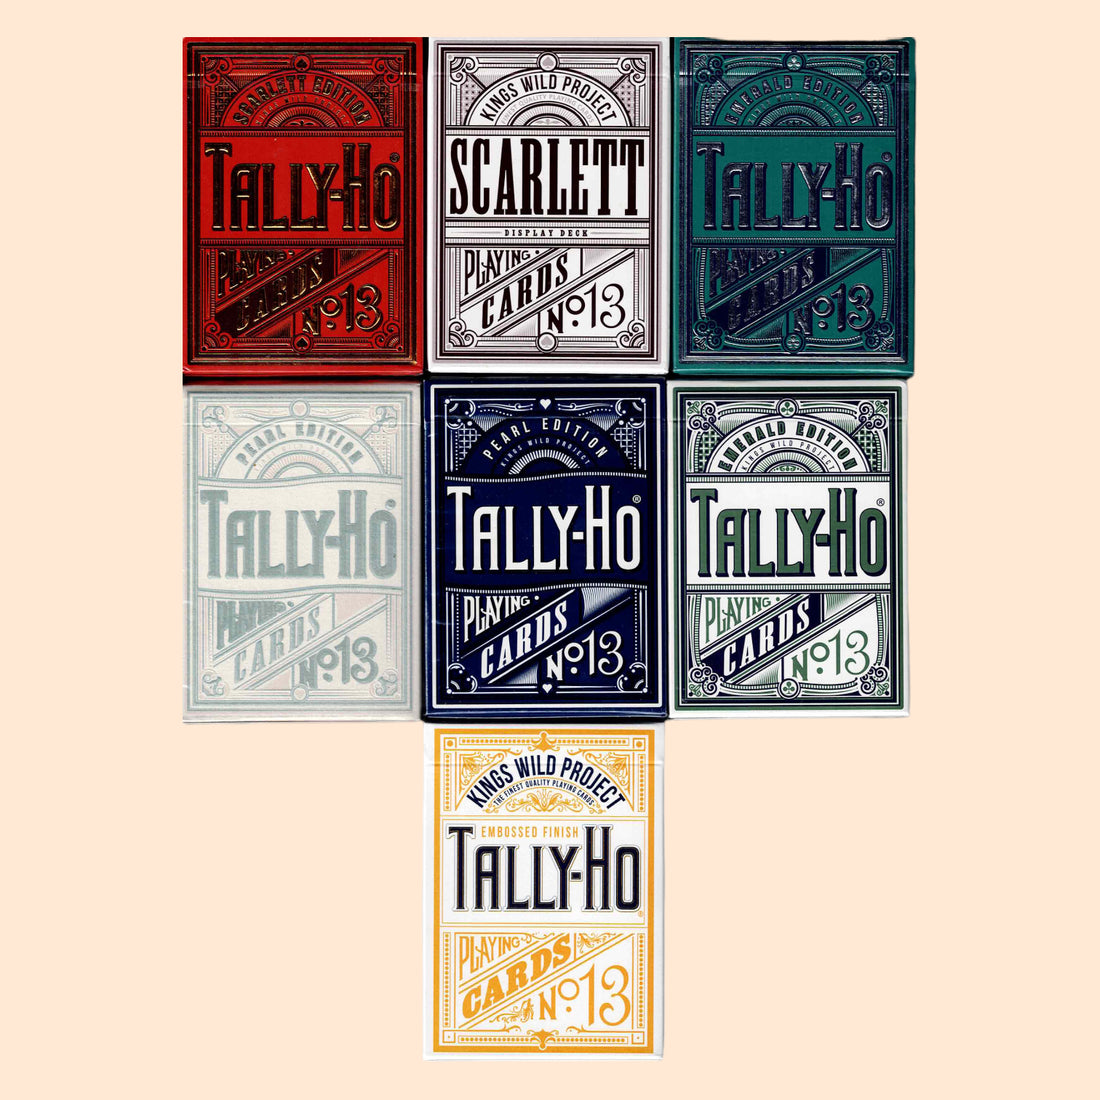 Tally Ho Scarlett Display Emerald Silver Pearl Players Turtle Playing Cards by Kings Wild Project